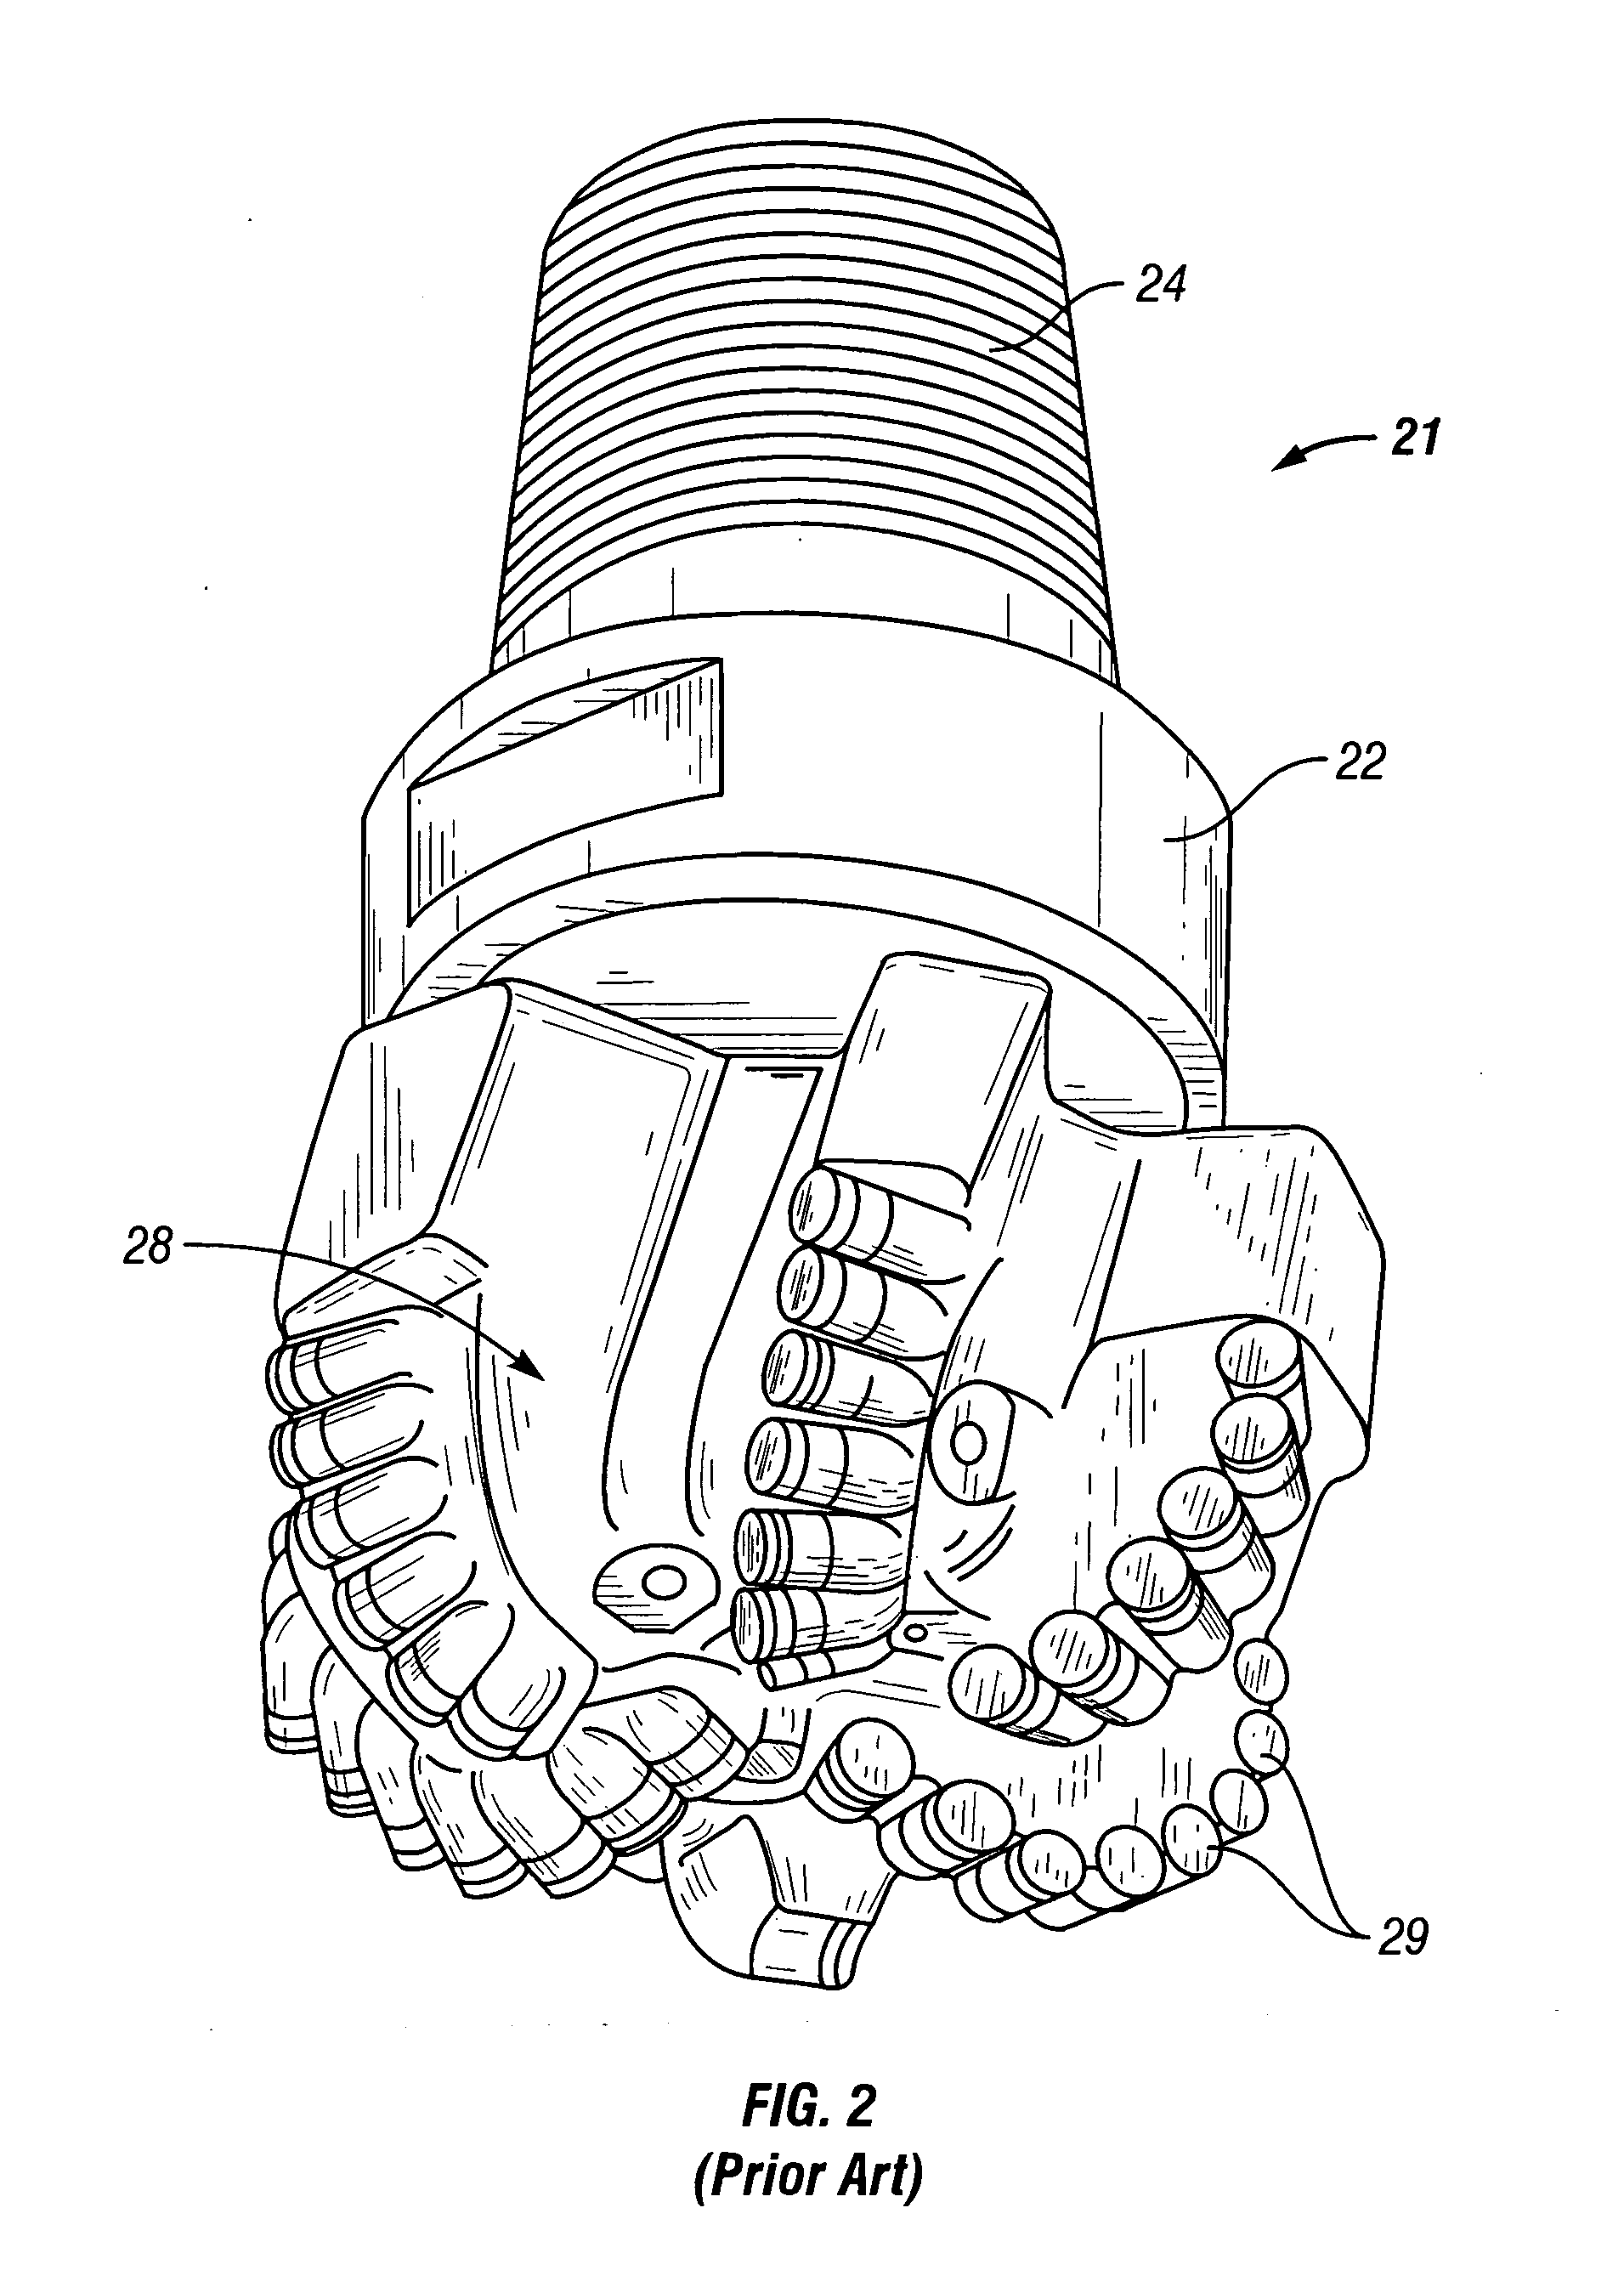 PDC drill bit with cutter design optimized with dynamic centerline analysis and having dynamic center line trajectory